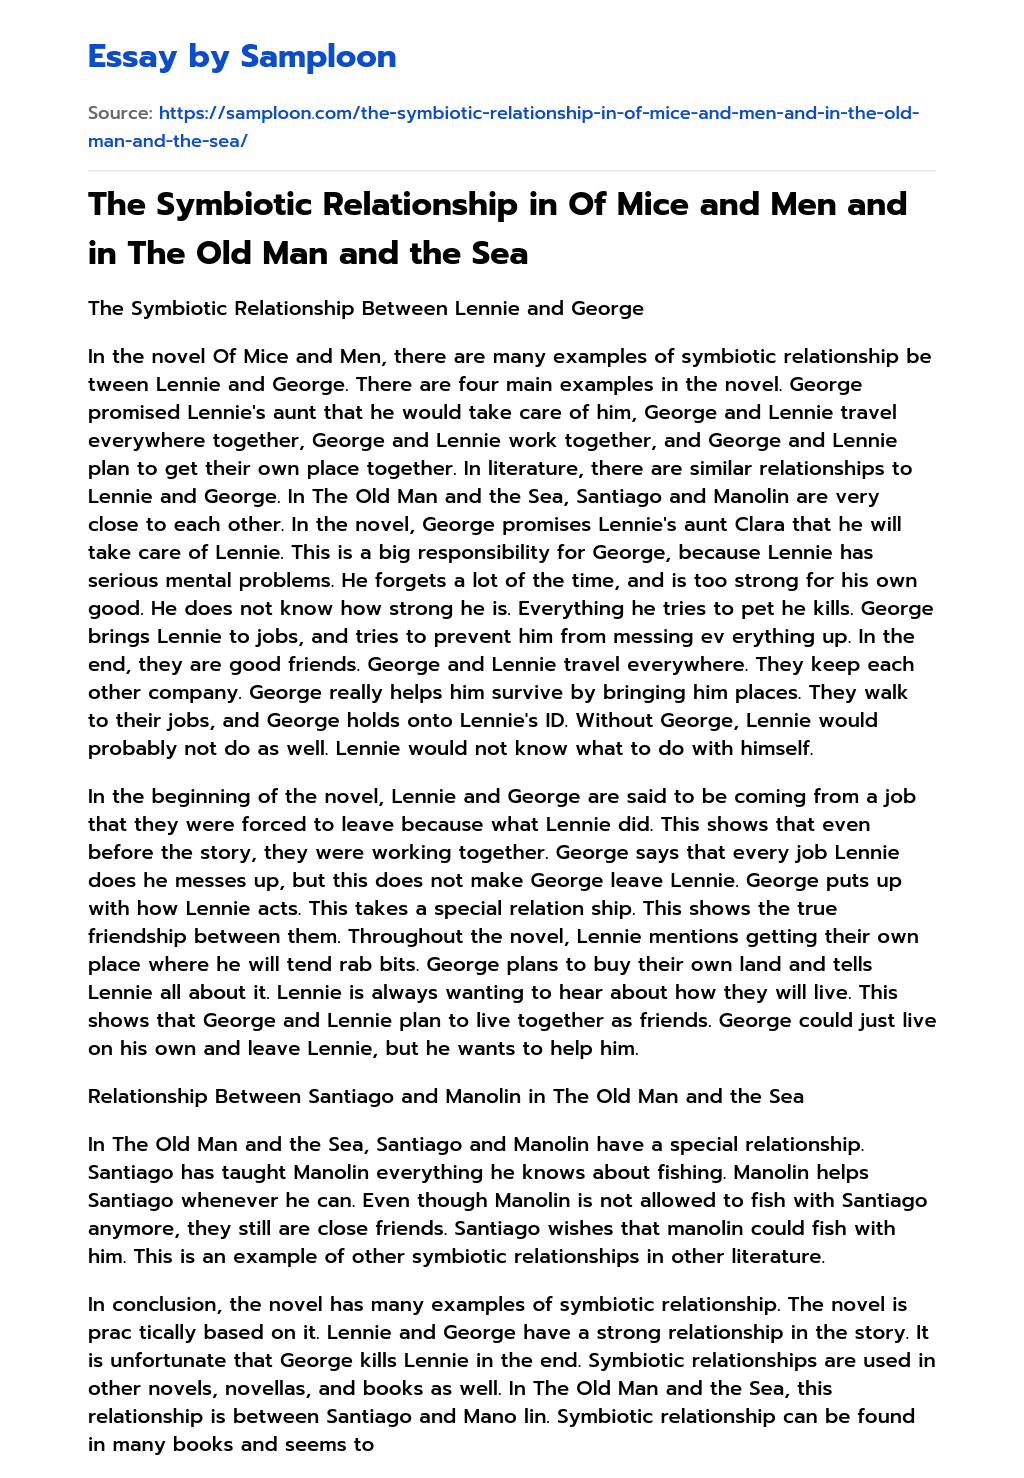 The Symbiotic Relationship in Of Mice and Men and in The Old Man and the Sea essay